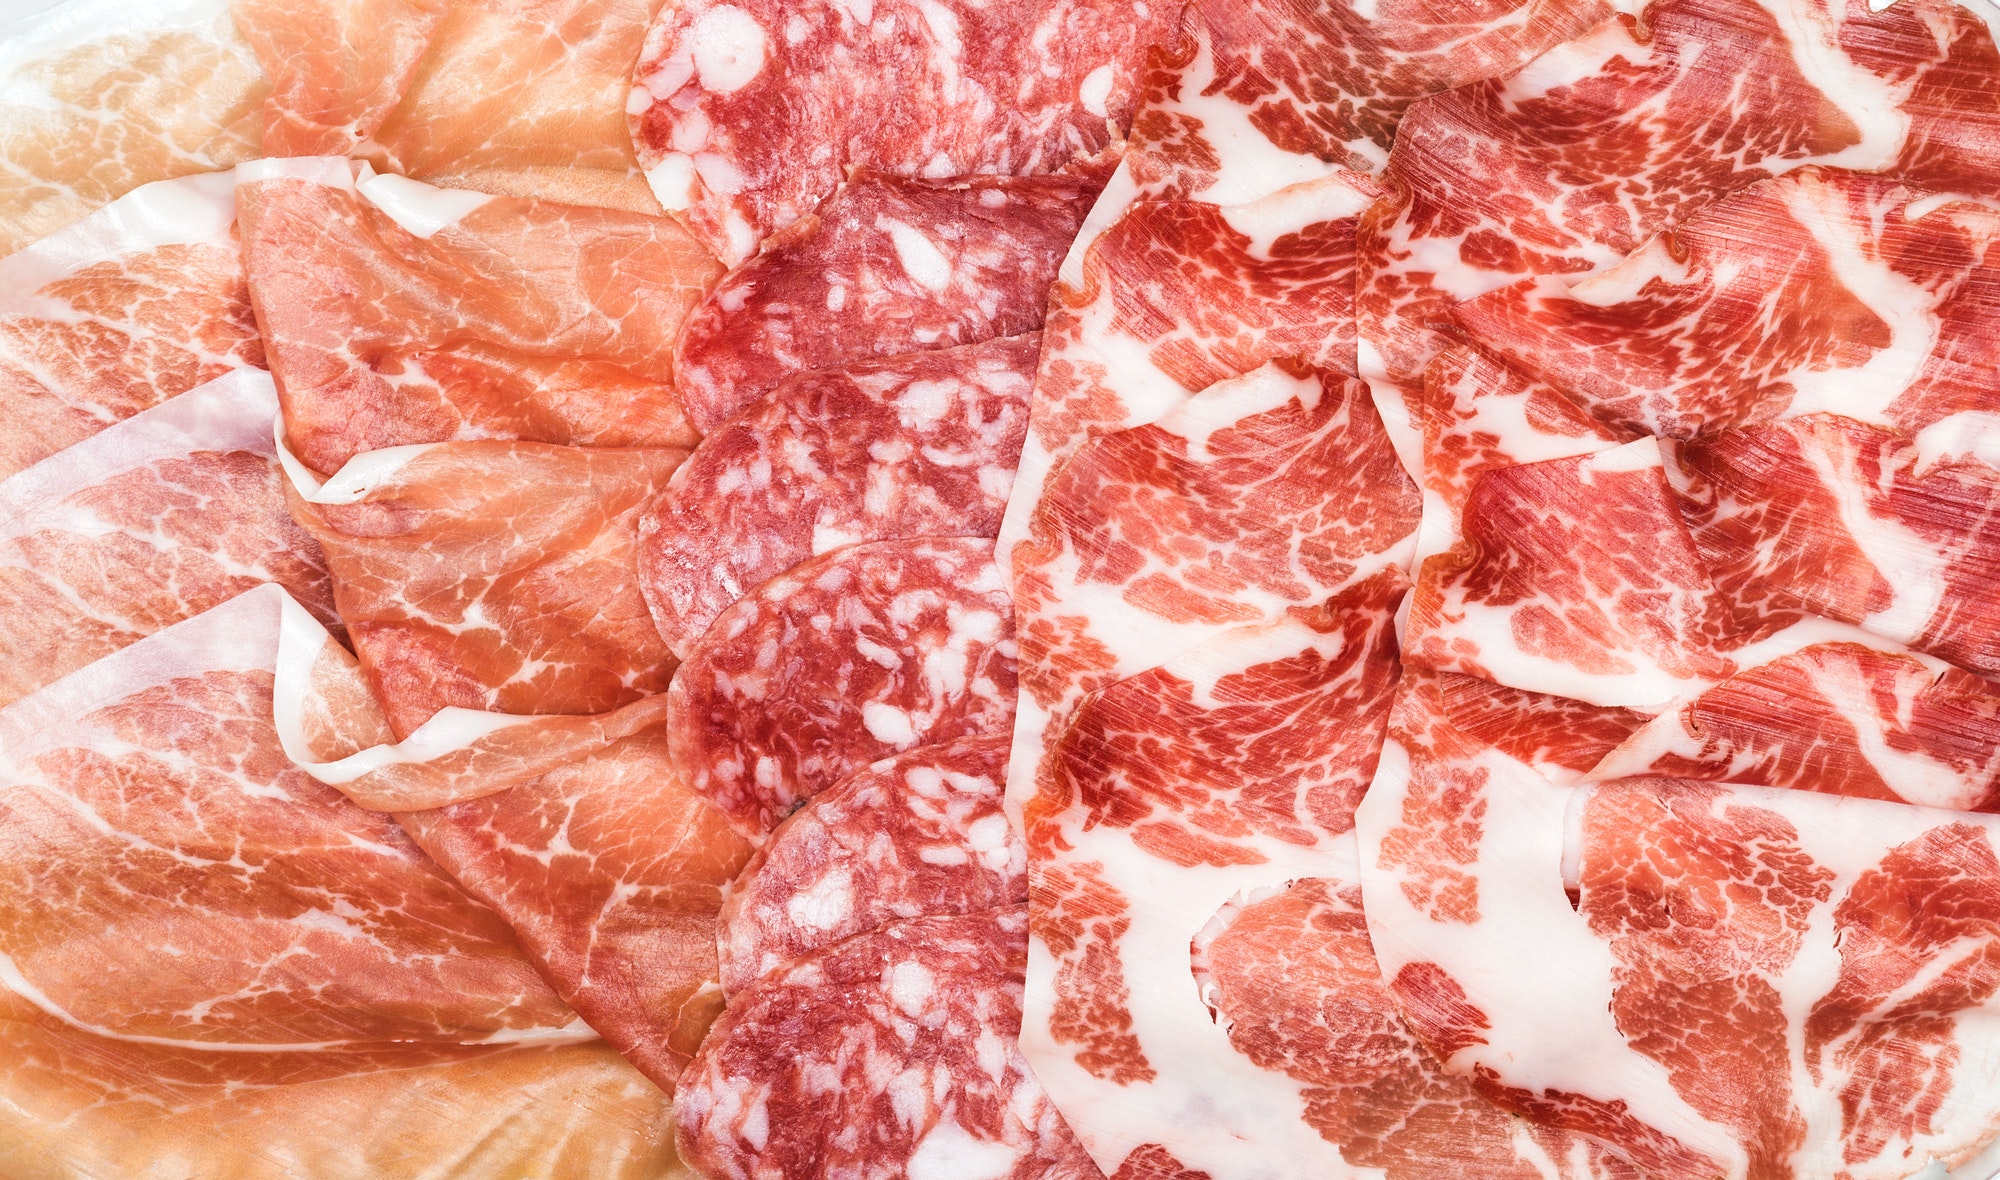 The 5 Step Procedure To Curing Meats